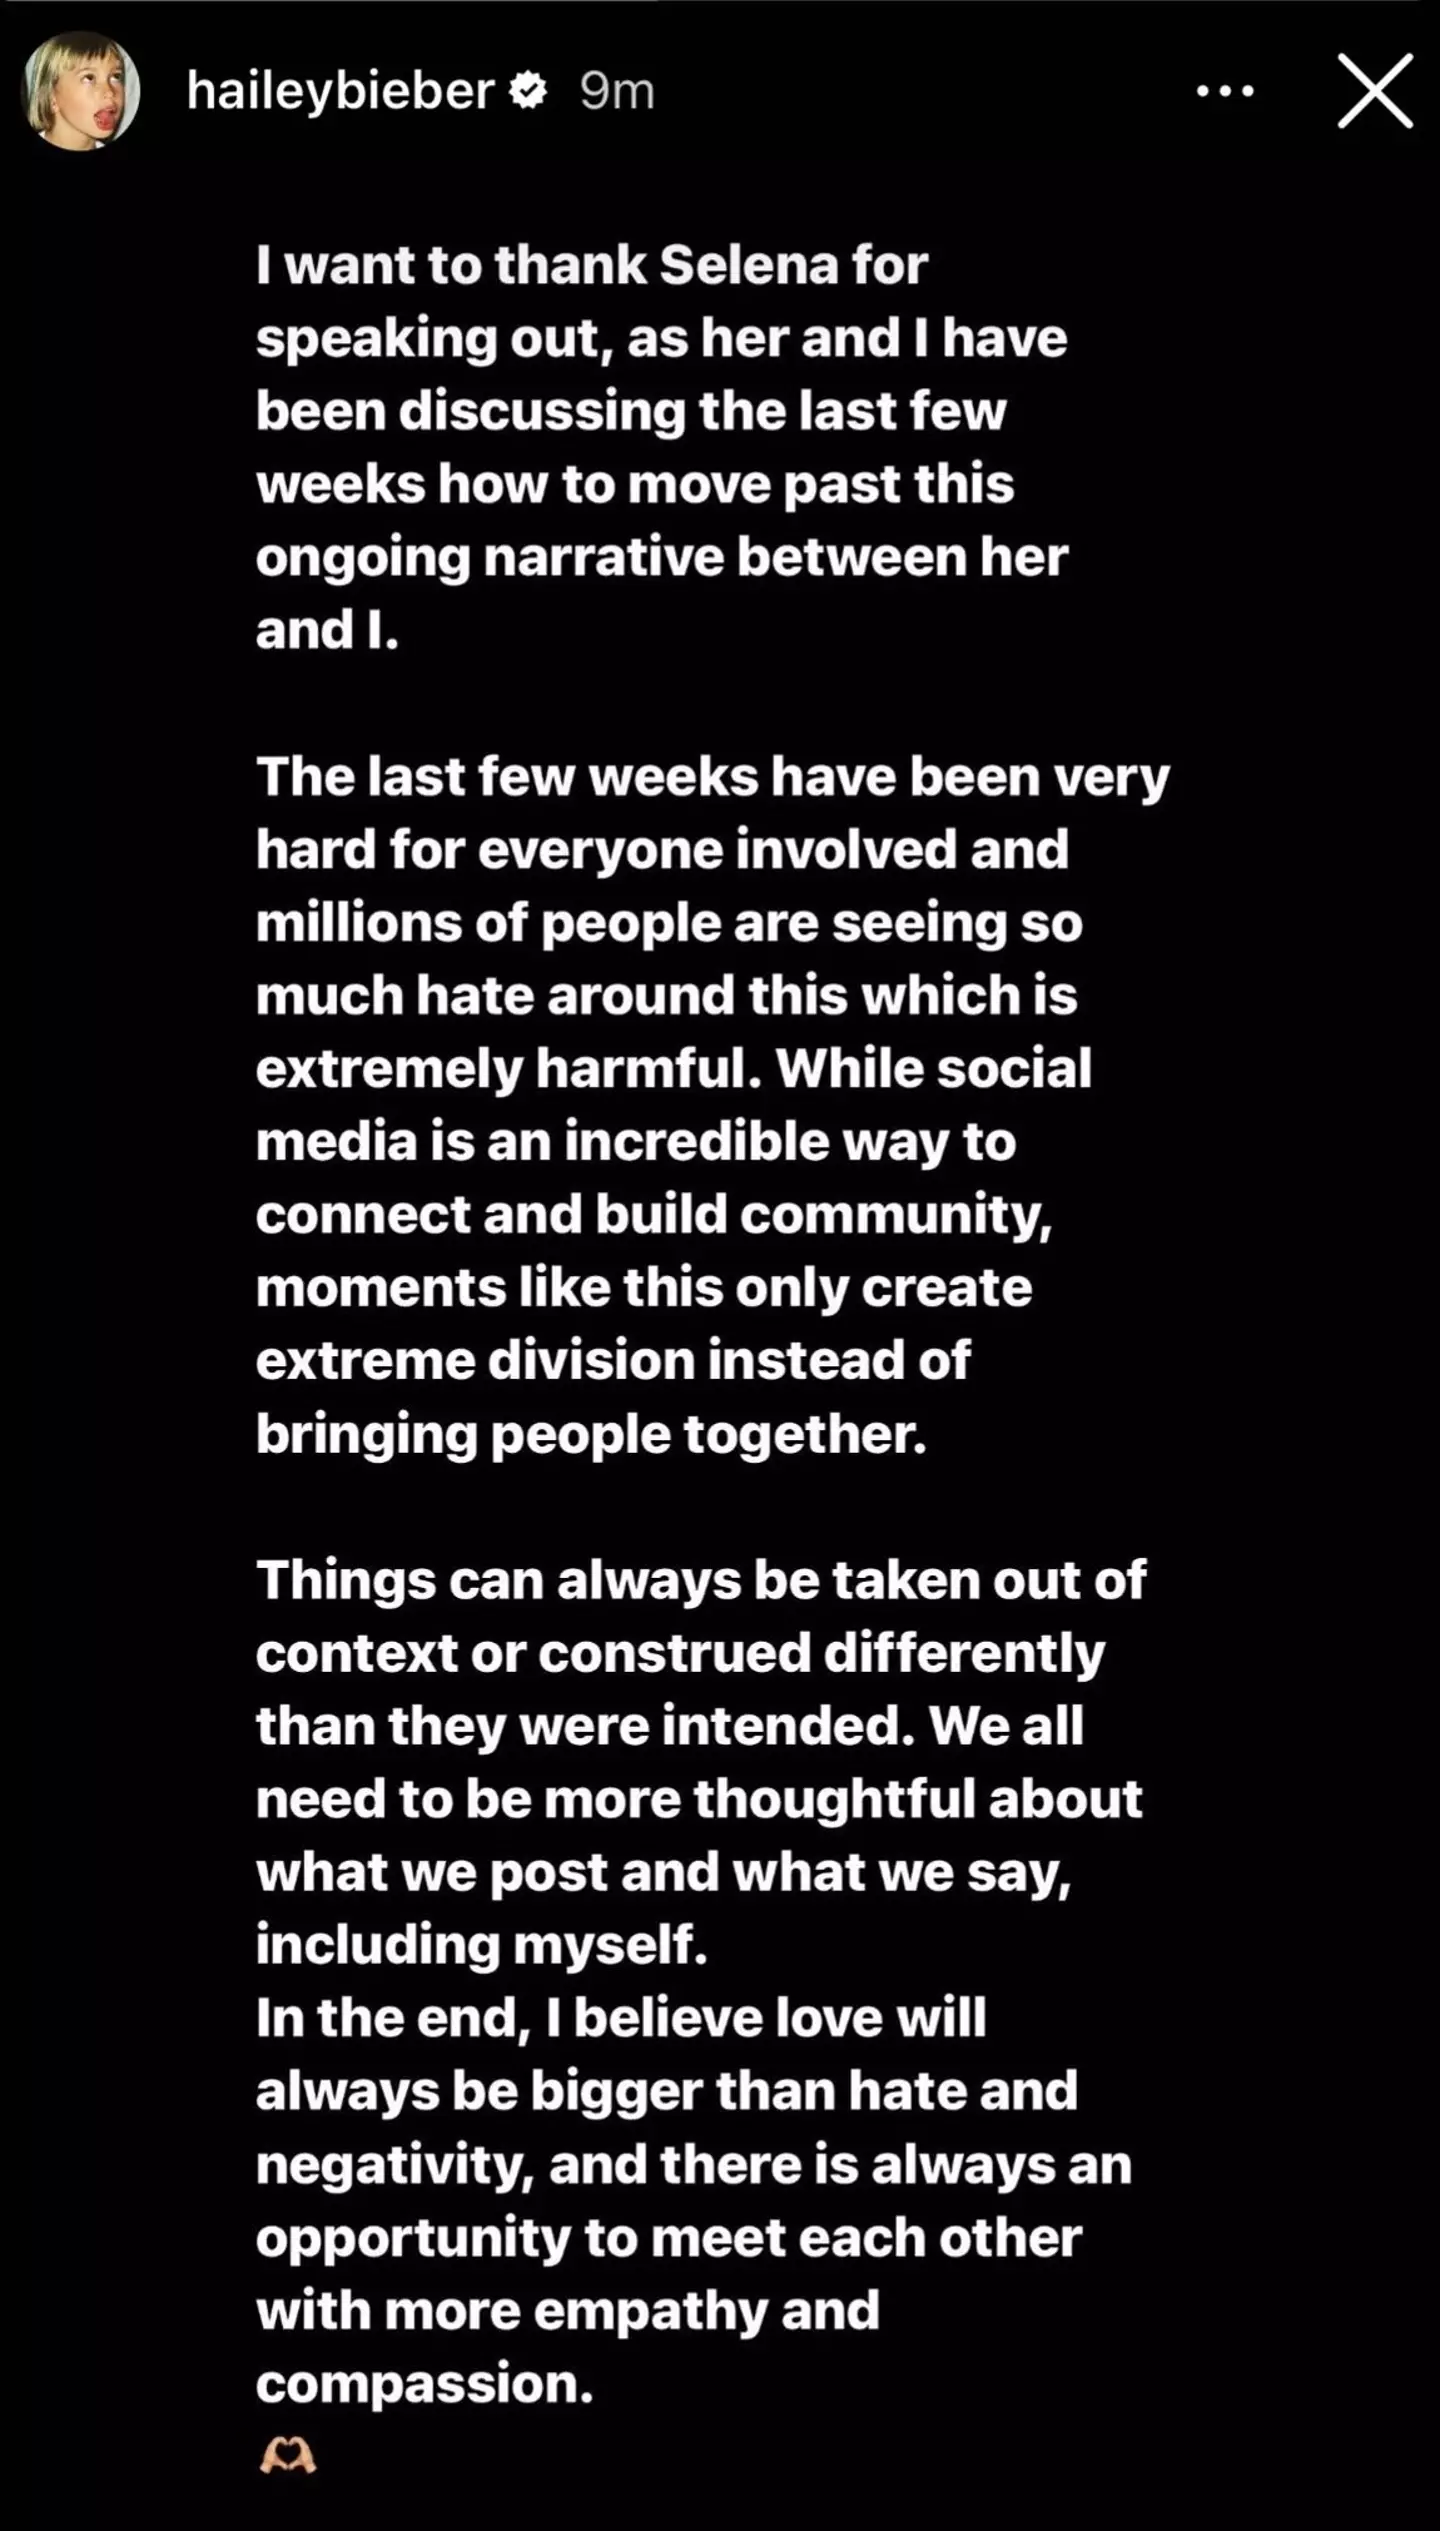 Hailey Bieber has shared her own statement on the matter.